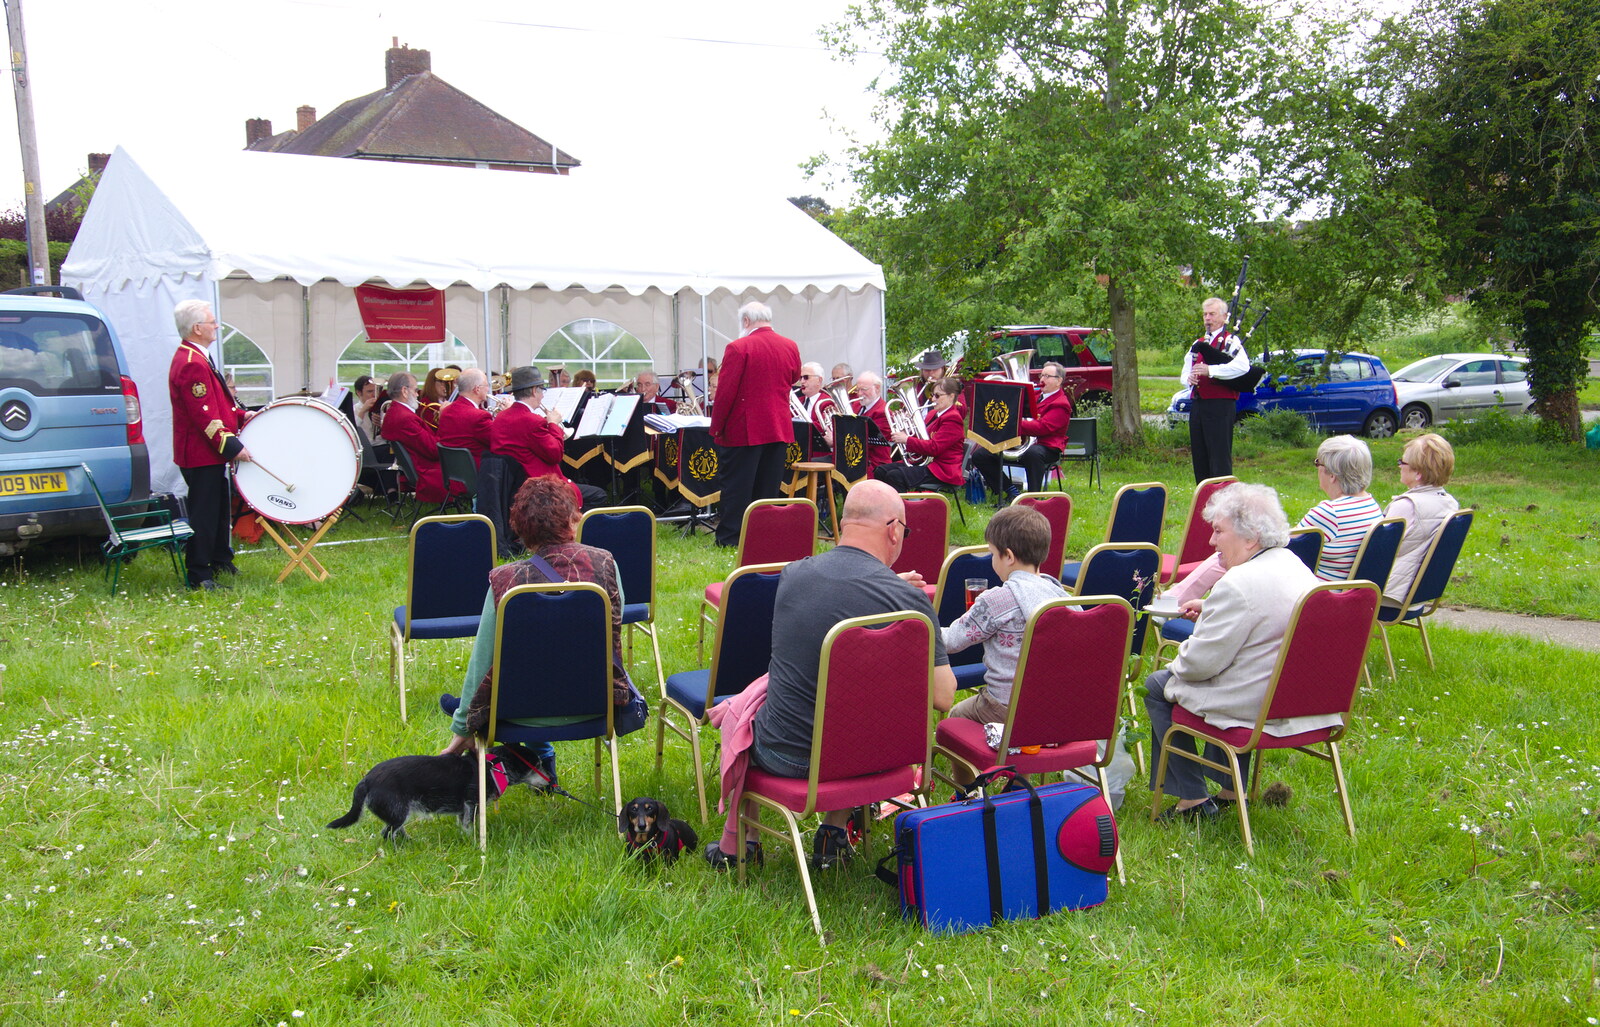 There's a small crowd watching from The Gislingham Silver Band at the Village Hall, Gislingham, Suffolk - 12th May 2019